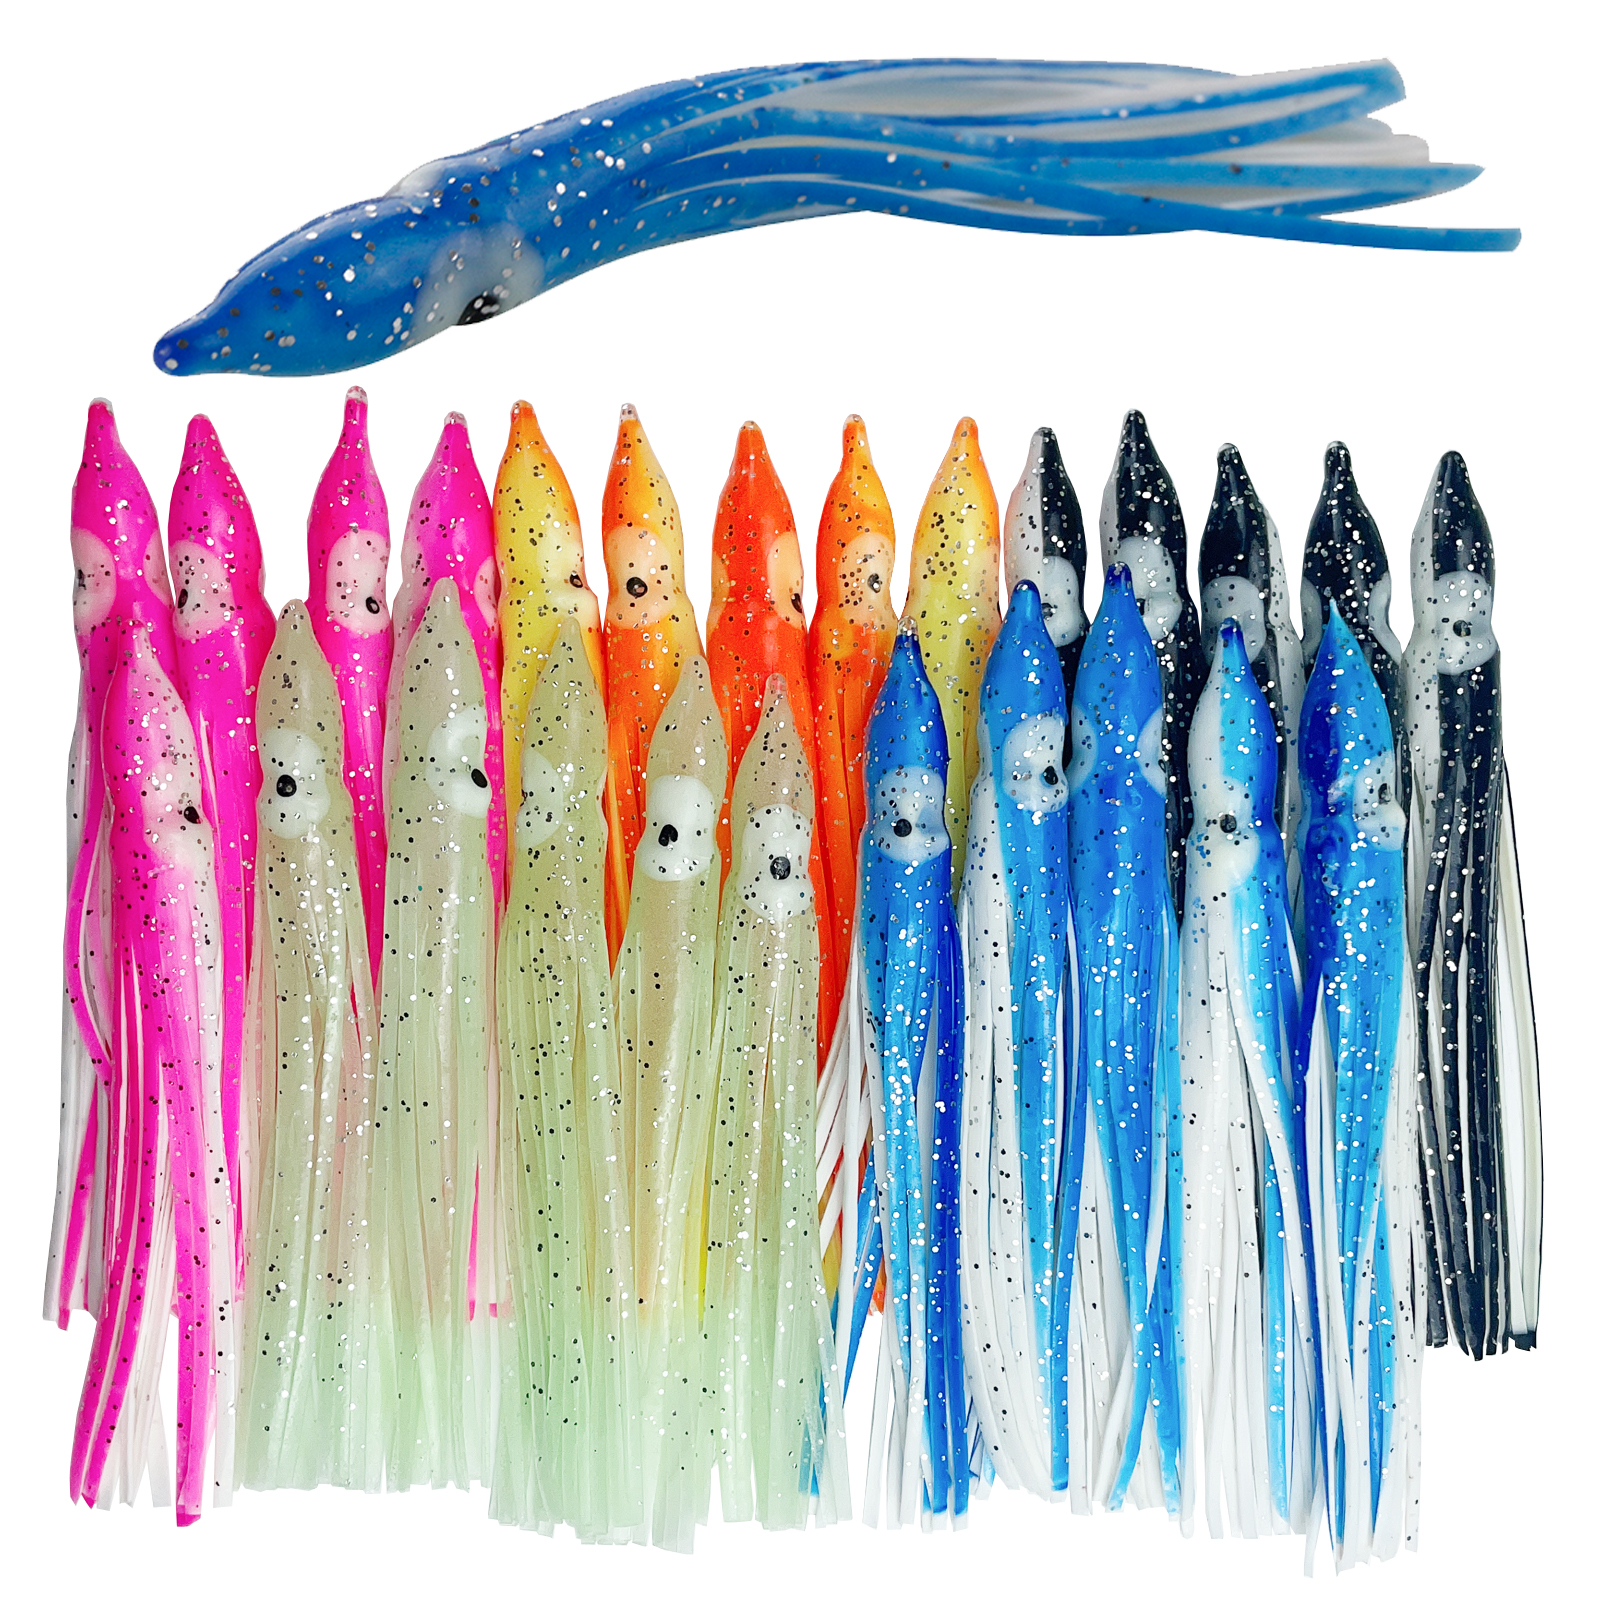 FFREE FISHER 25pcs Fishing Octopus Lures Soft PVC Skrits Squids Artificial Bait 12cm with 5/0# 8299 Octopus Hooks for Sea Fishing